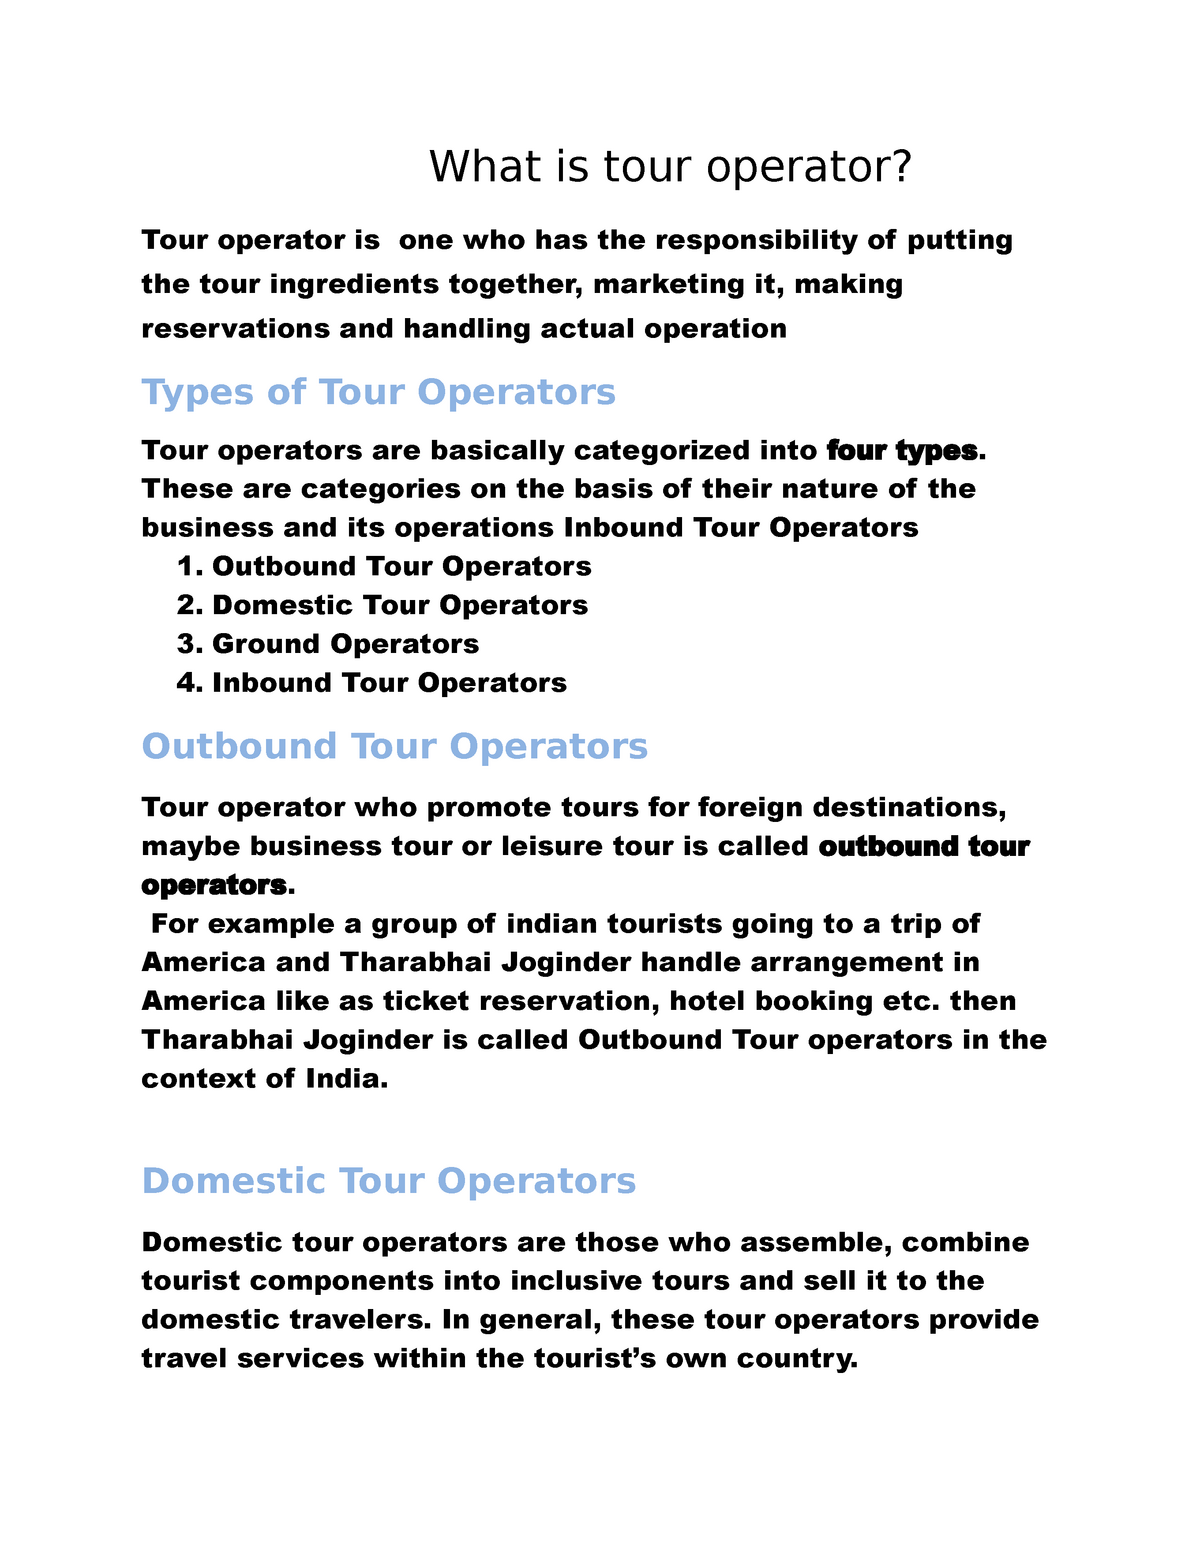 examples of outbound tour operators